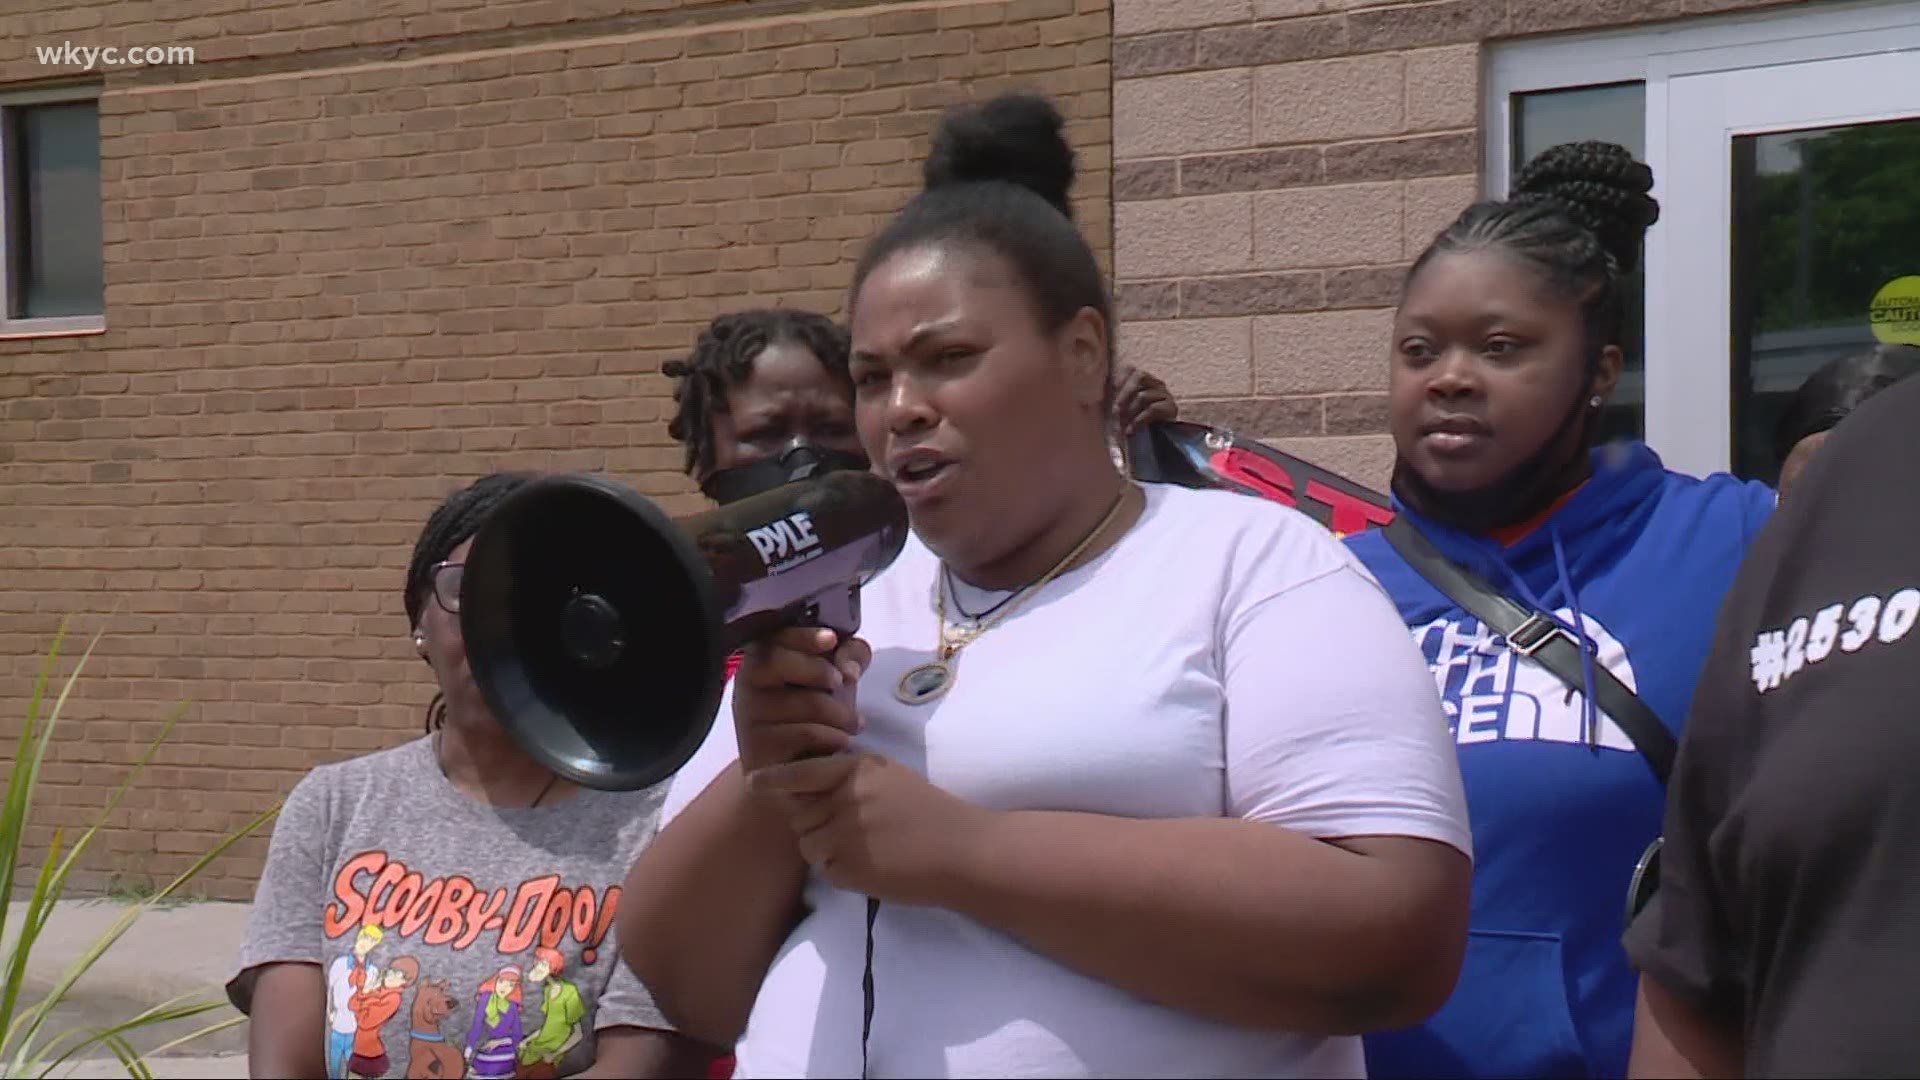 Keith's family and friends held a rally outside of CMHA police headquarters Saturday. Marisa Saenz reports.